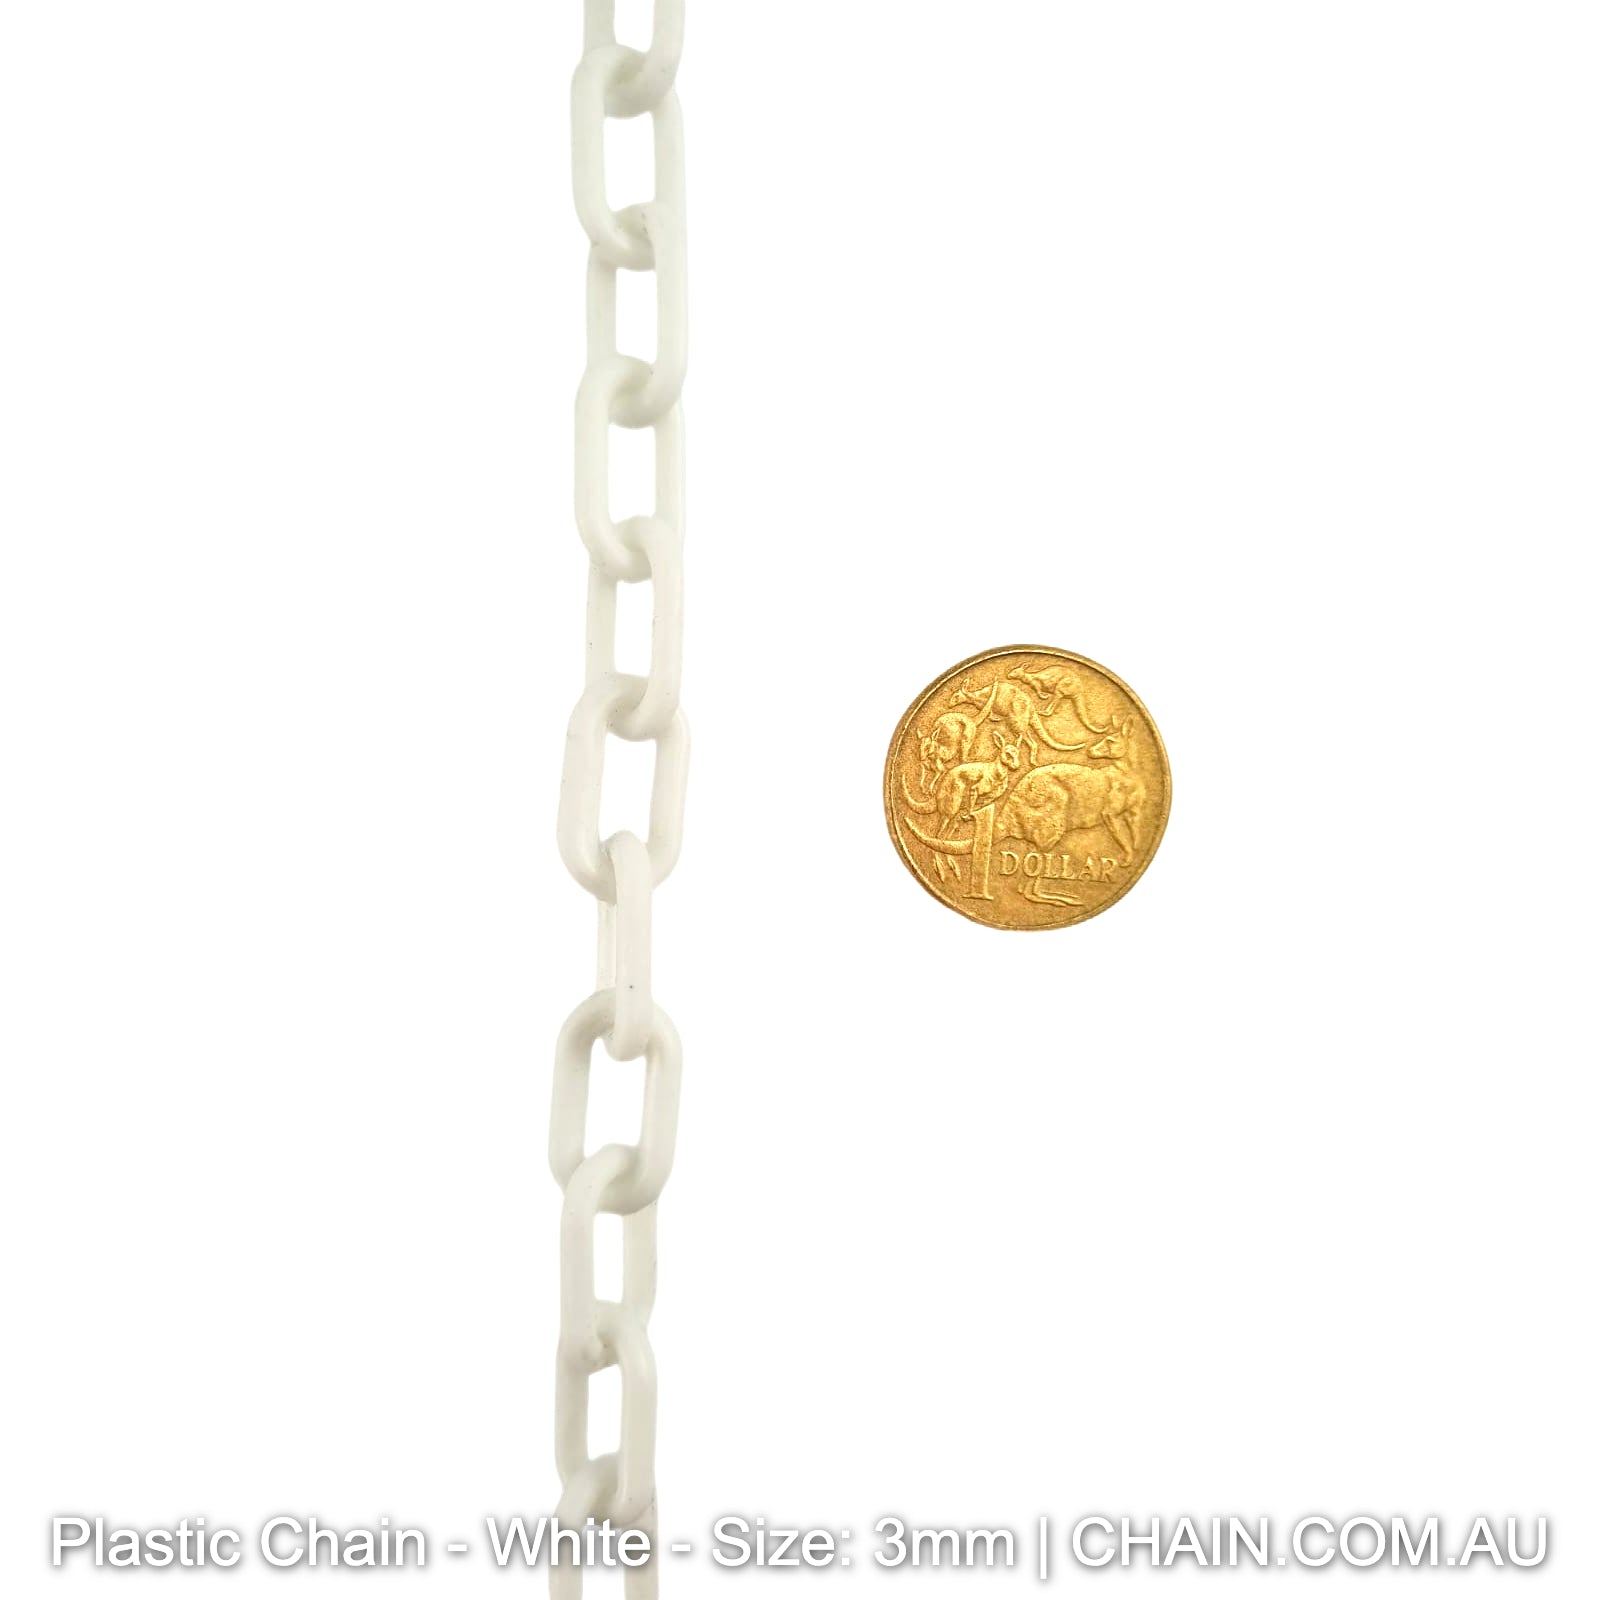 White Plastic Chain, size 3mm. Chain by the metre. Shipping Australia wide